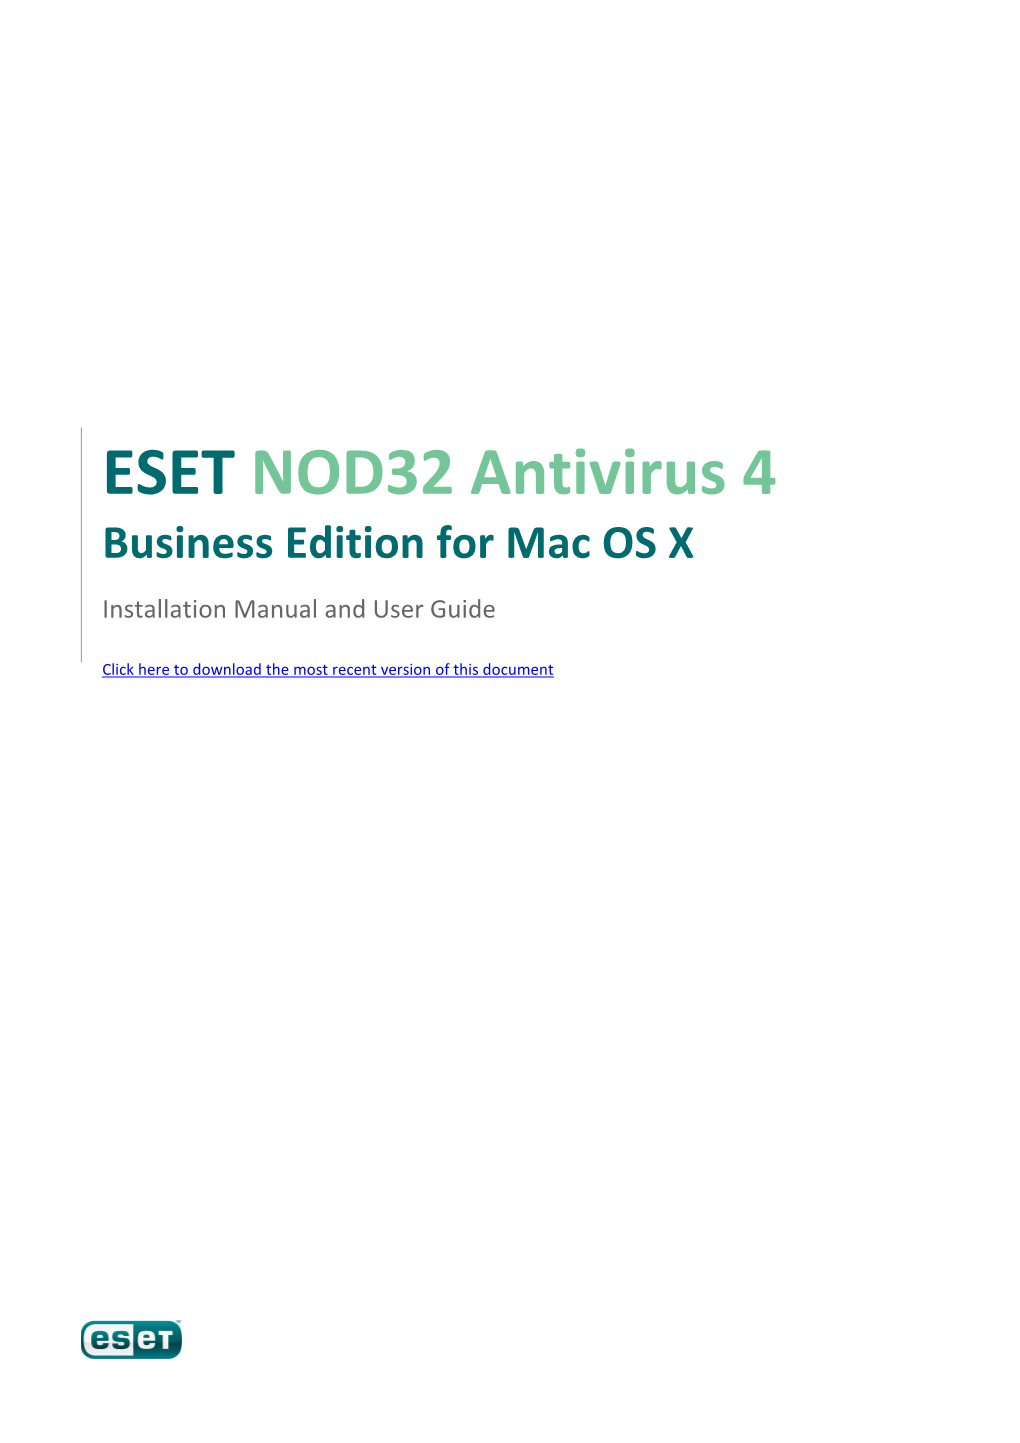 ESET NOD32 Antivirus 4 Business Edition for Mac OS X Installation Manual and User Guide